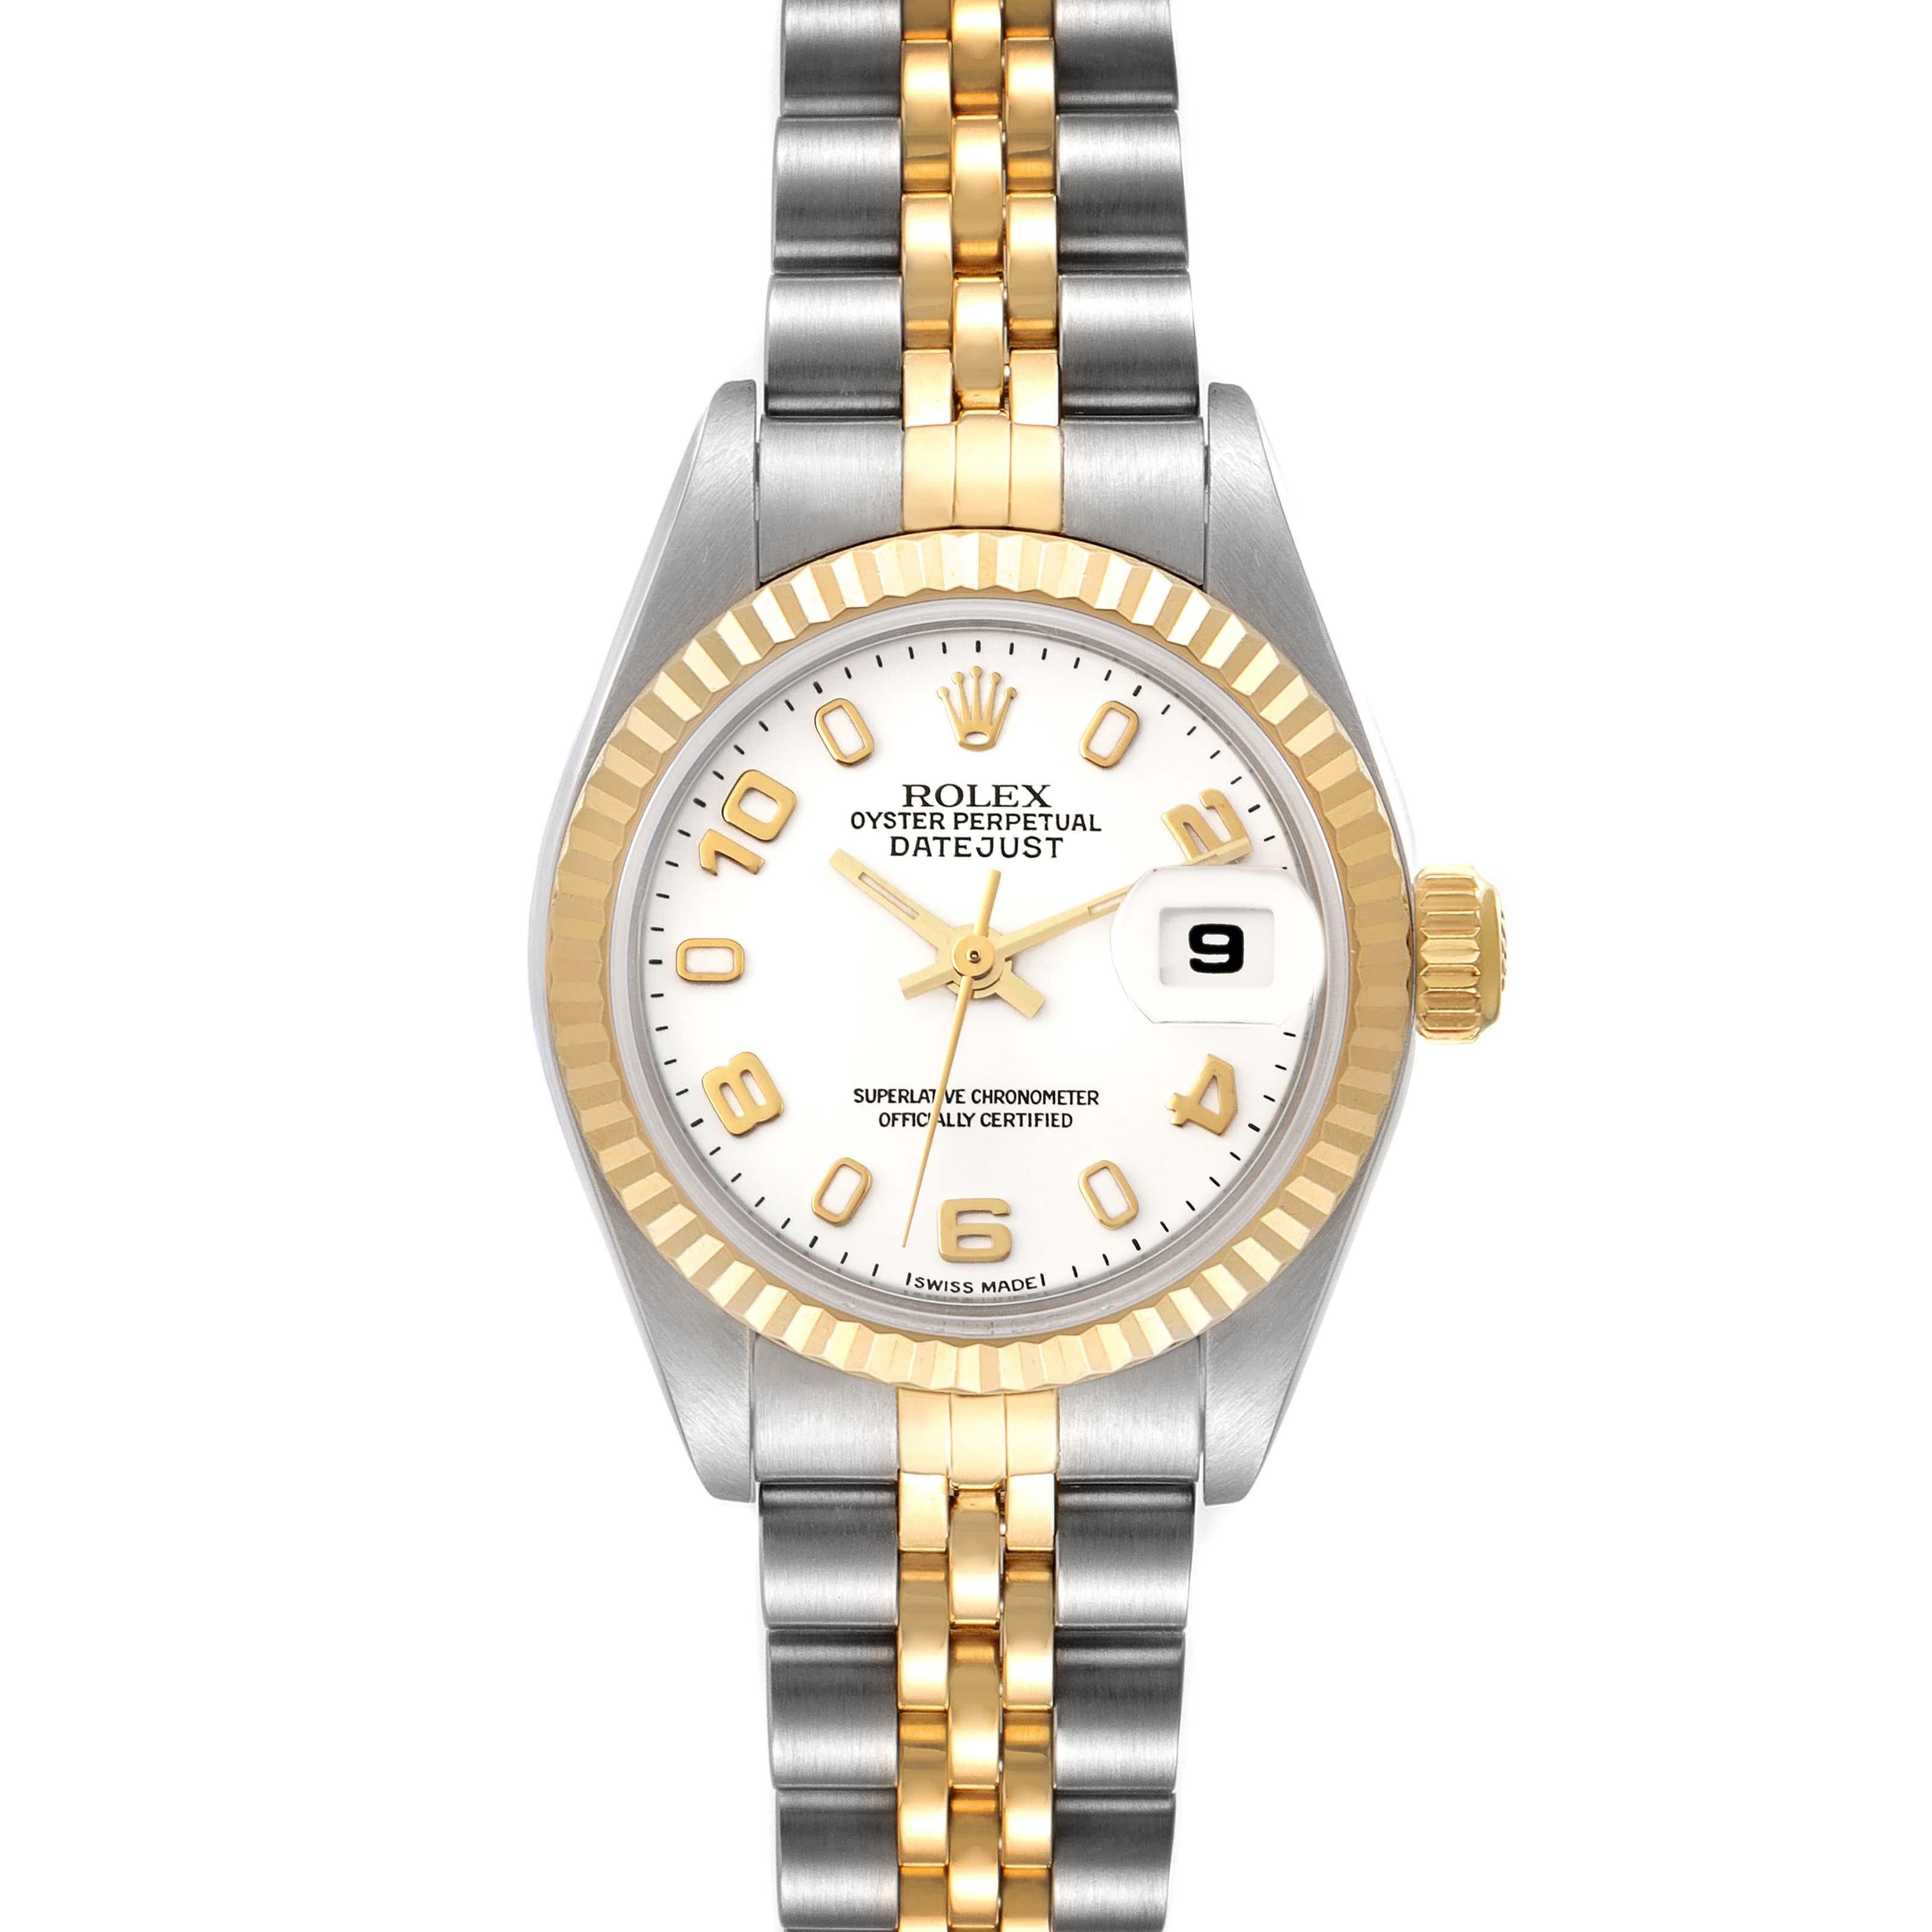 Rolex Datejust Steel Yellow Gold White Dial Ladies Watch 79173. Officially certified chronometer self-winding movement. Stainless steel oyster case 26 mm in diameter. Rolex logo on an 18K yellow gold crown. 18k yellow gold fluted bezel. Scratch